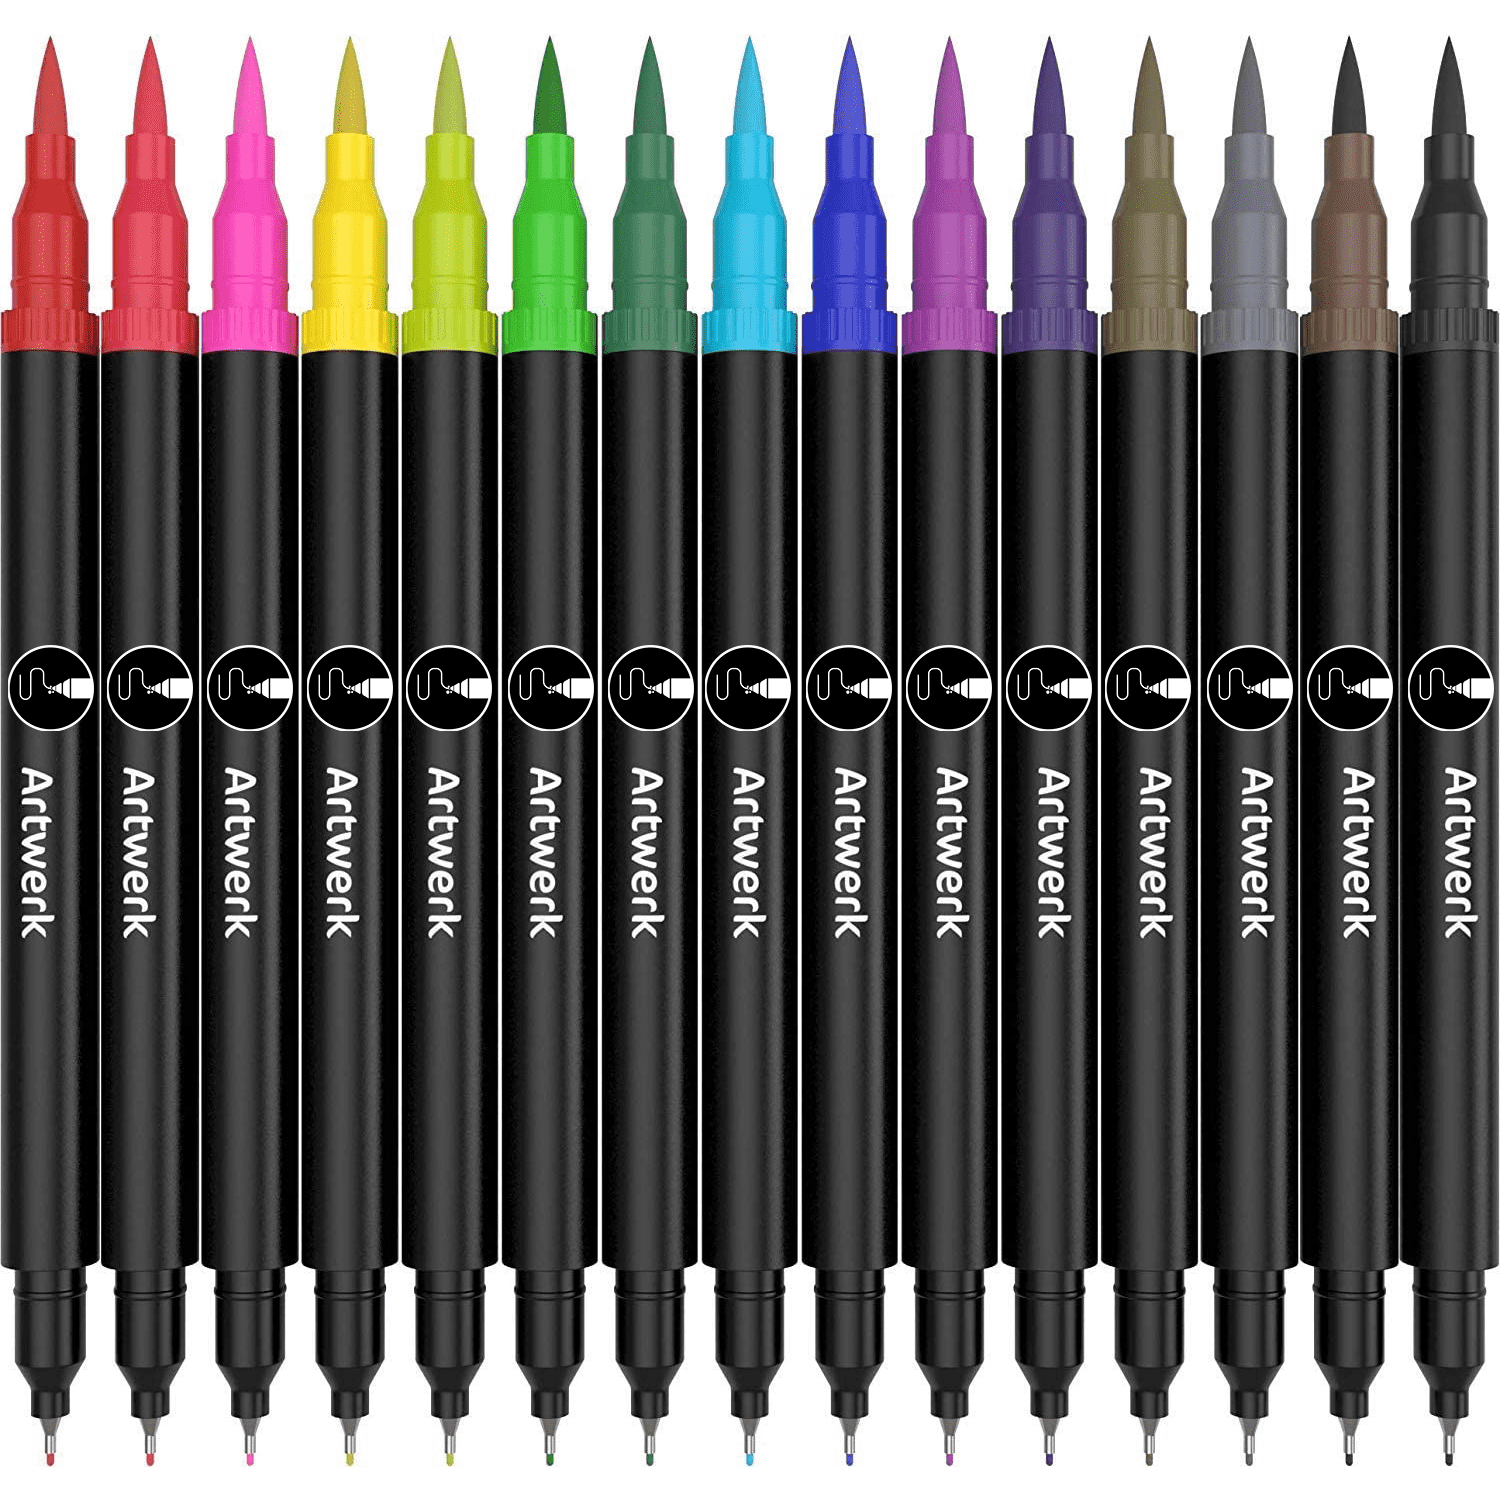 thin colored pens